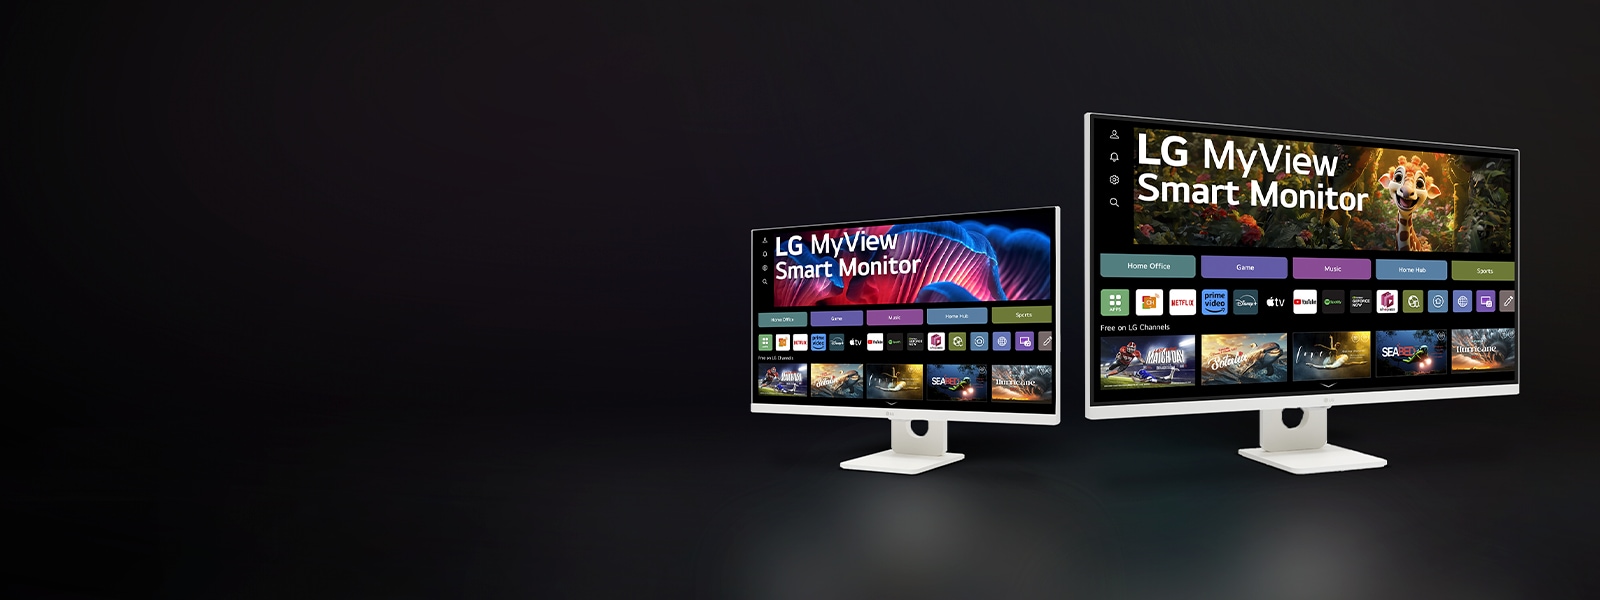 Pre-order & SAVE 25%* on select New MyView Smart Monitors1